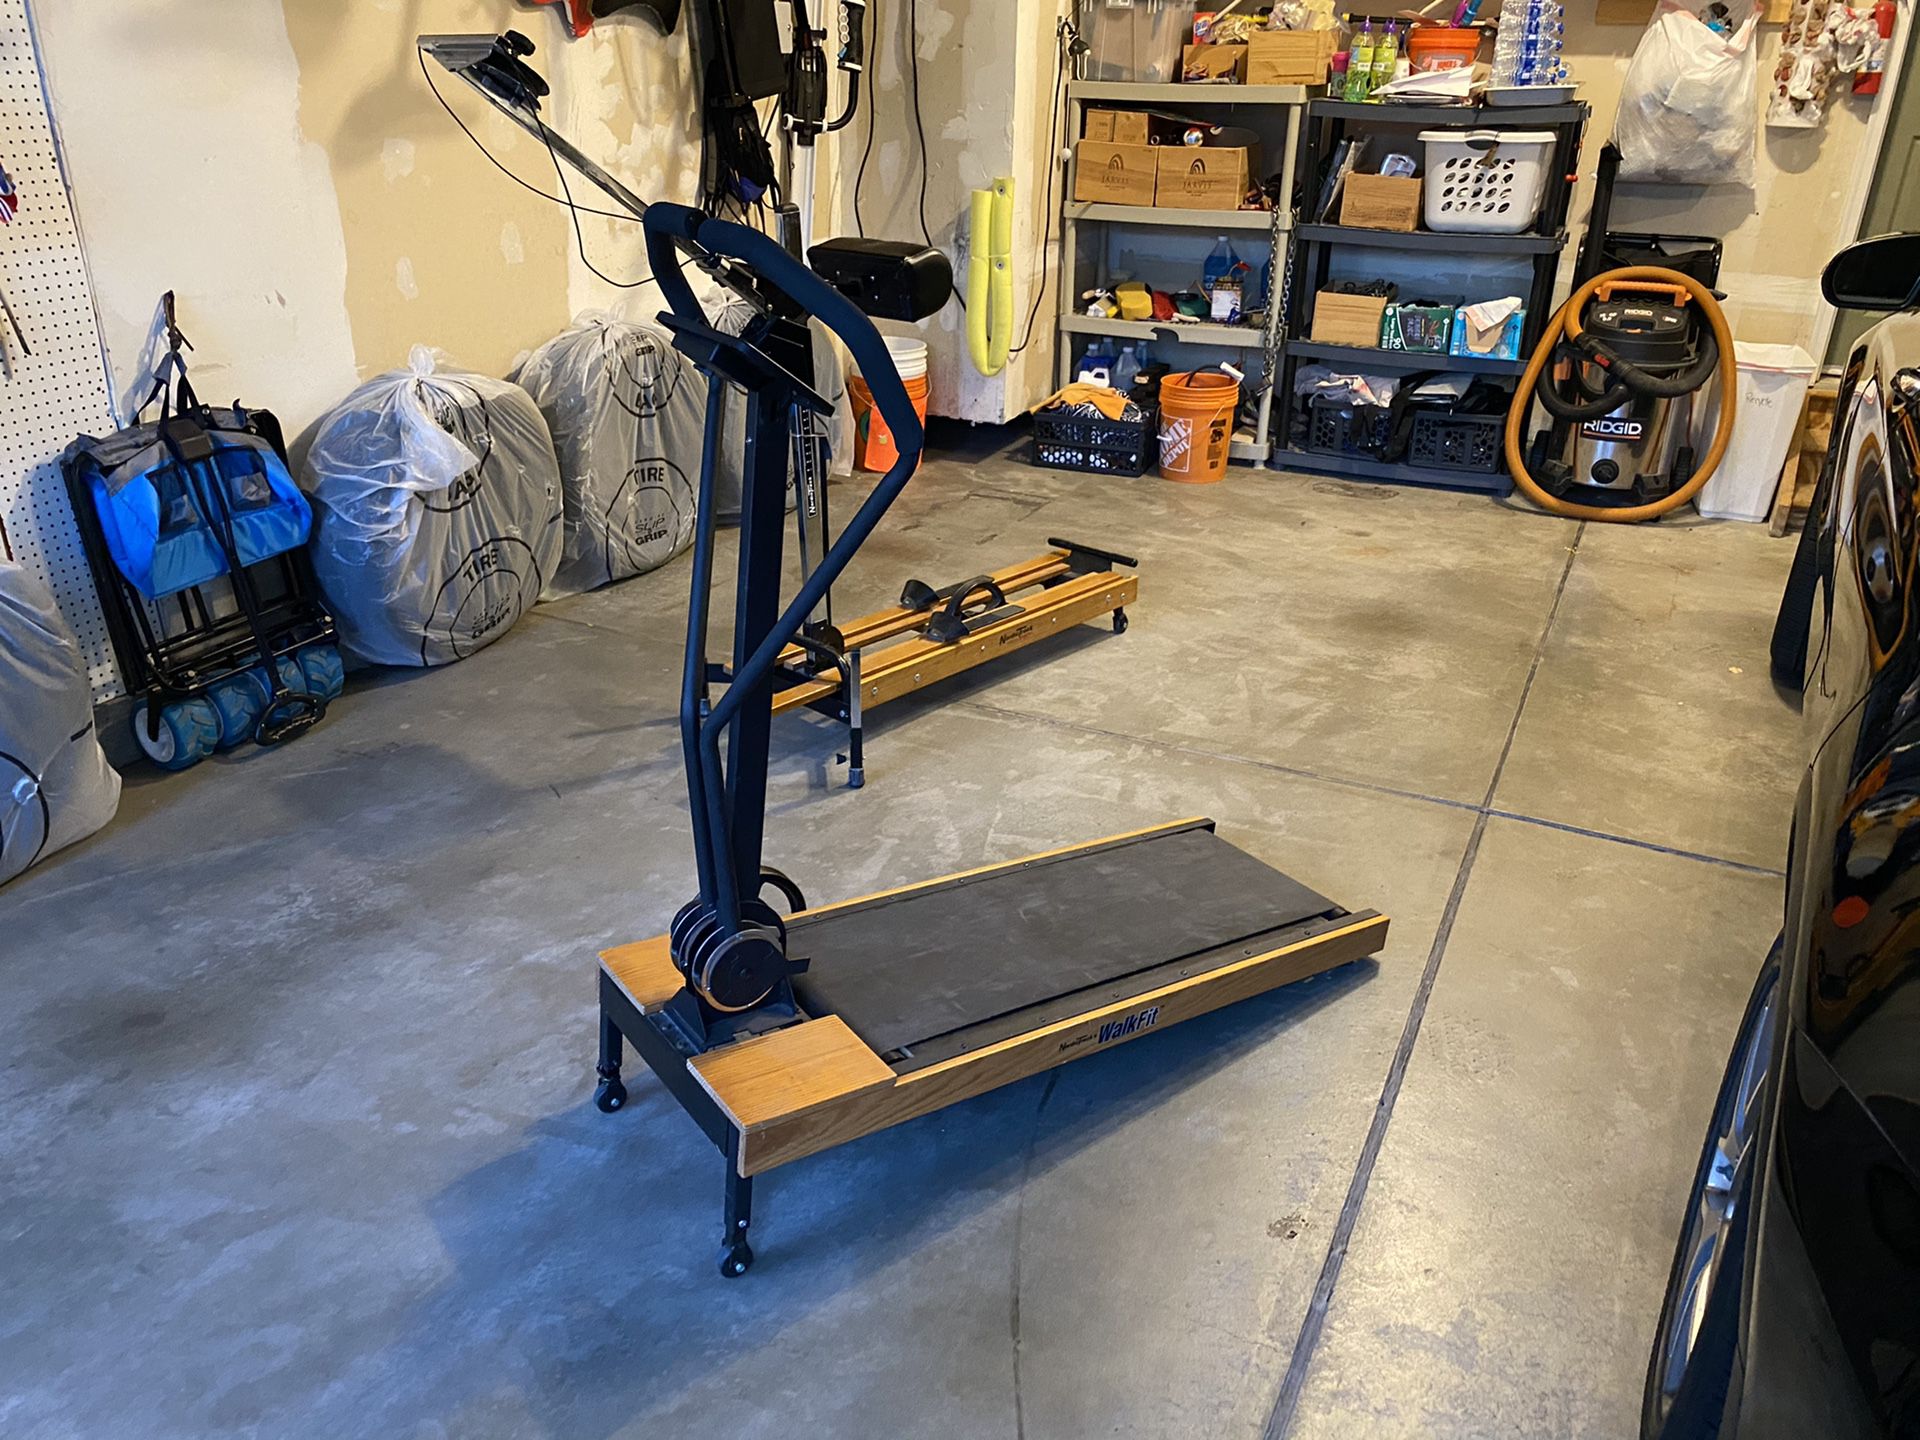 NordicTrack Pro and Walkfit Exercise Equipment